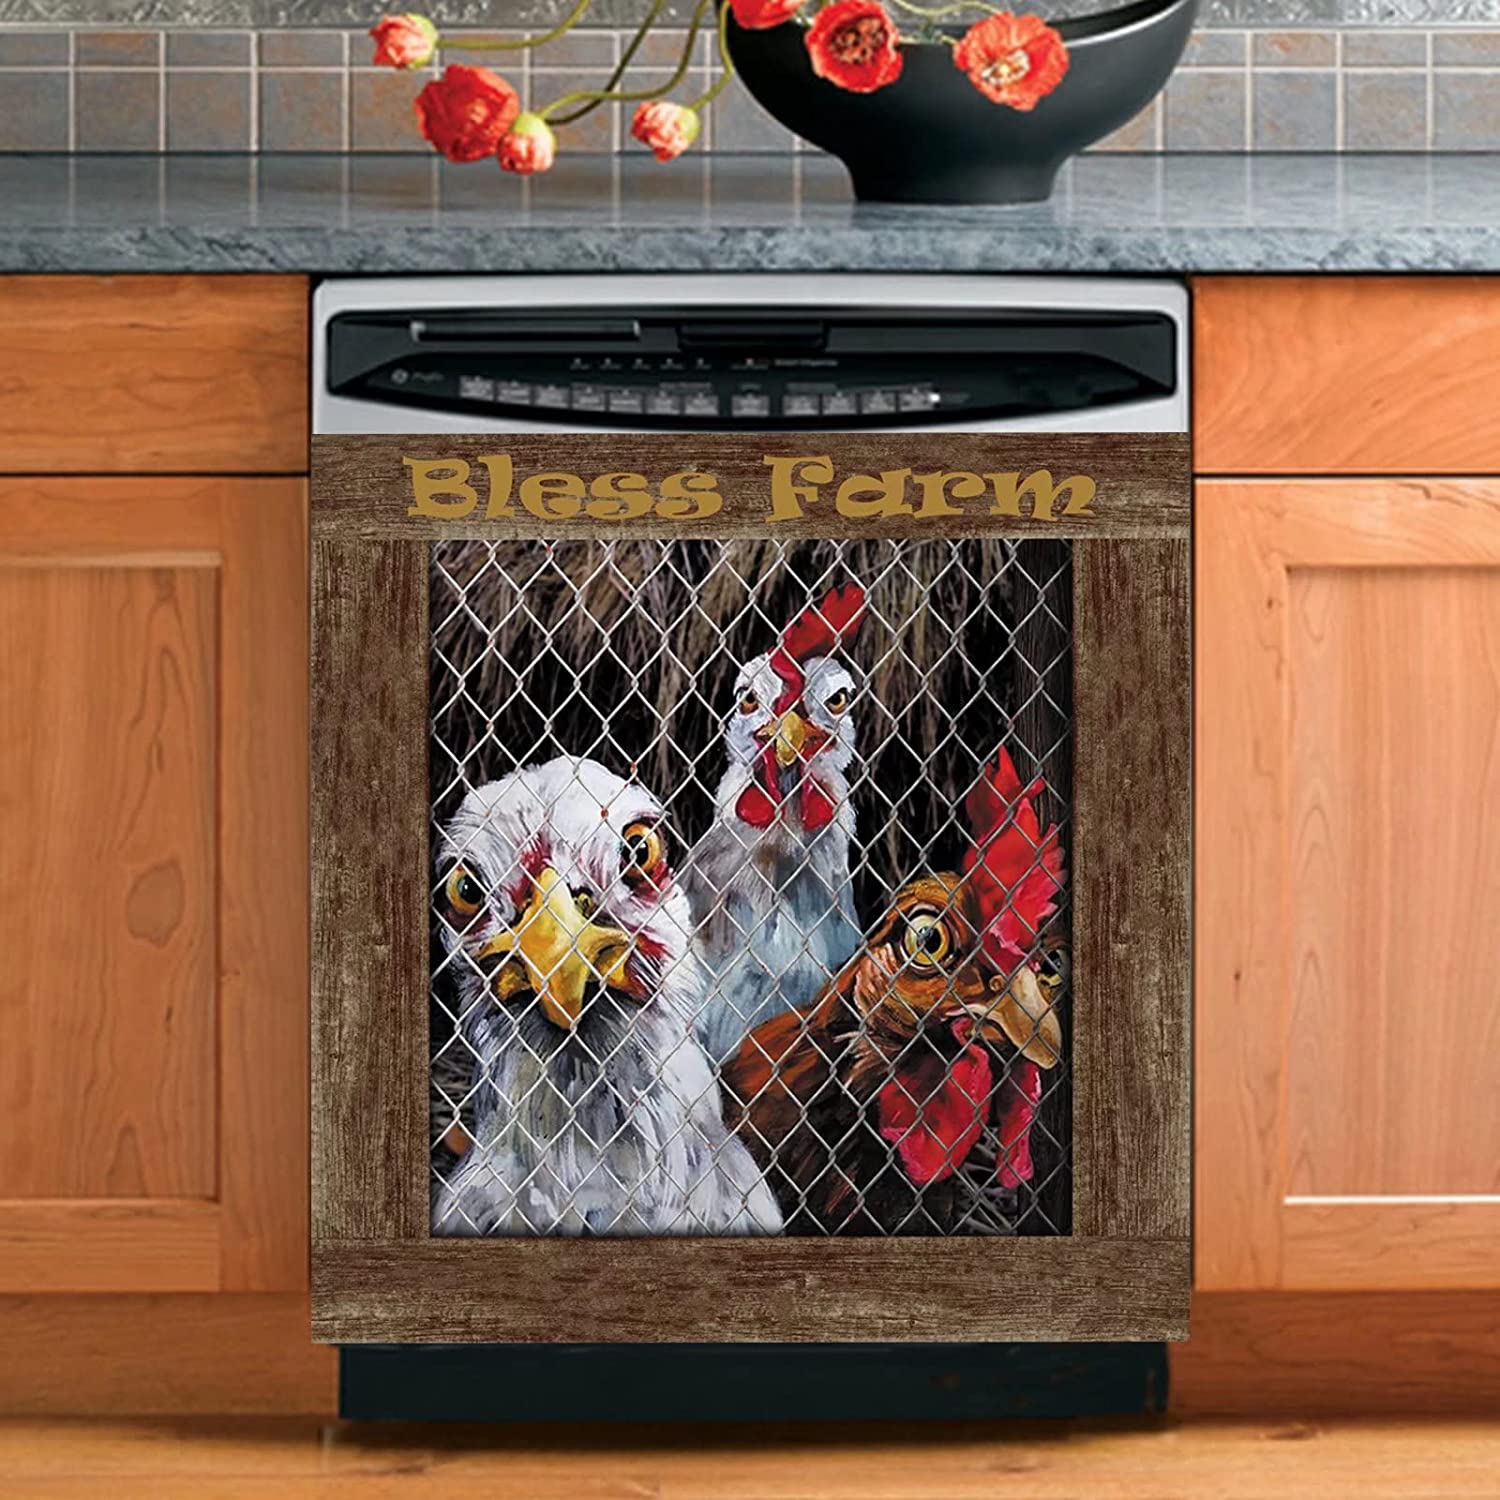 Refrigerator Magnets With Chicken & Rooster Designs